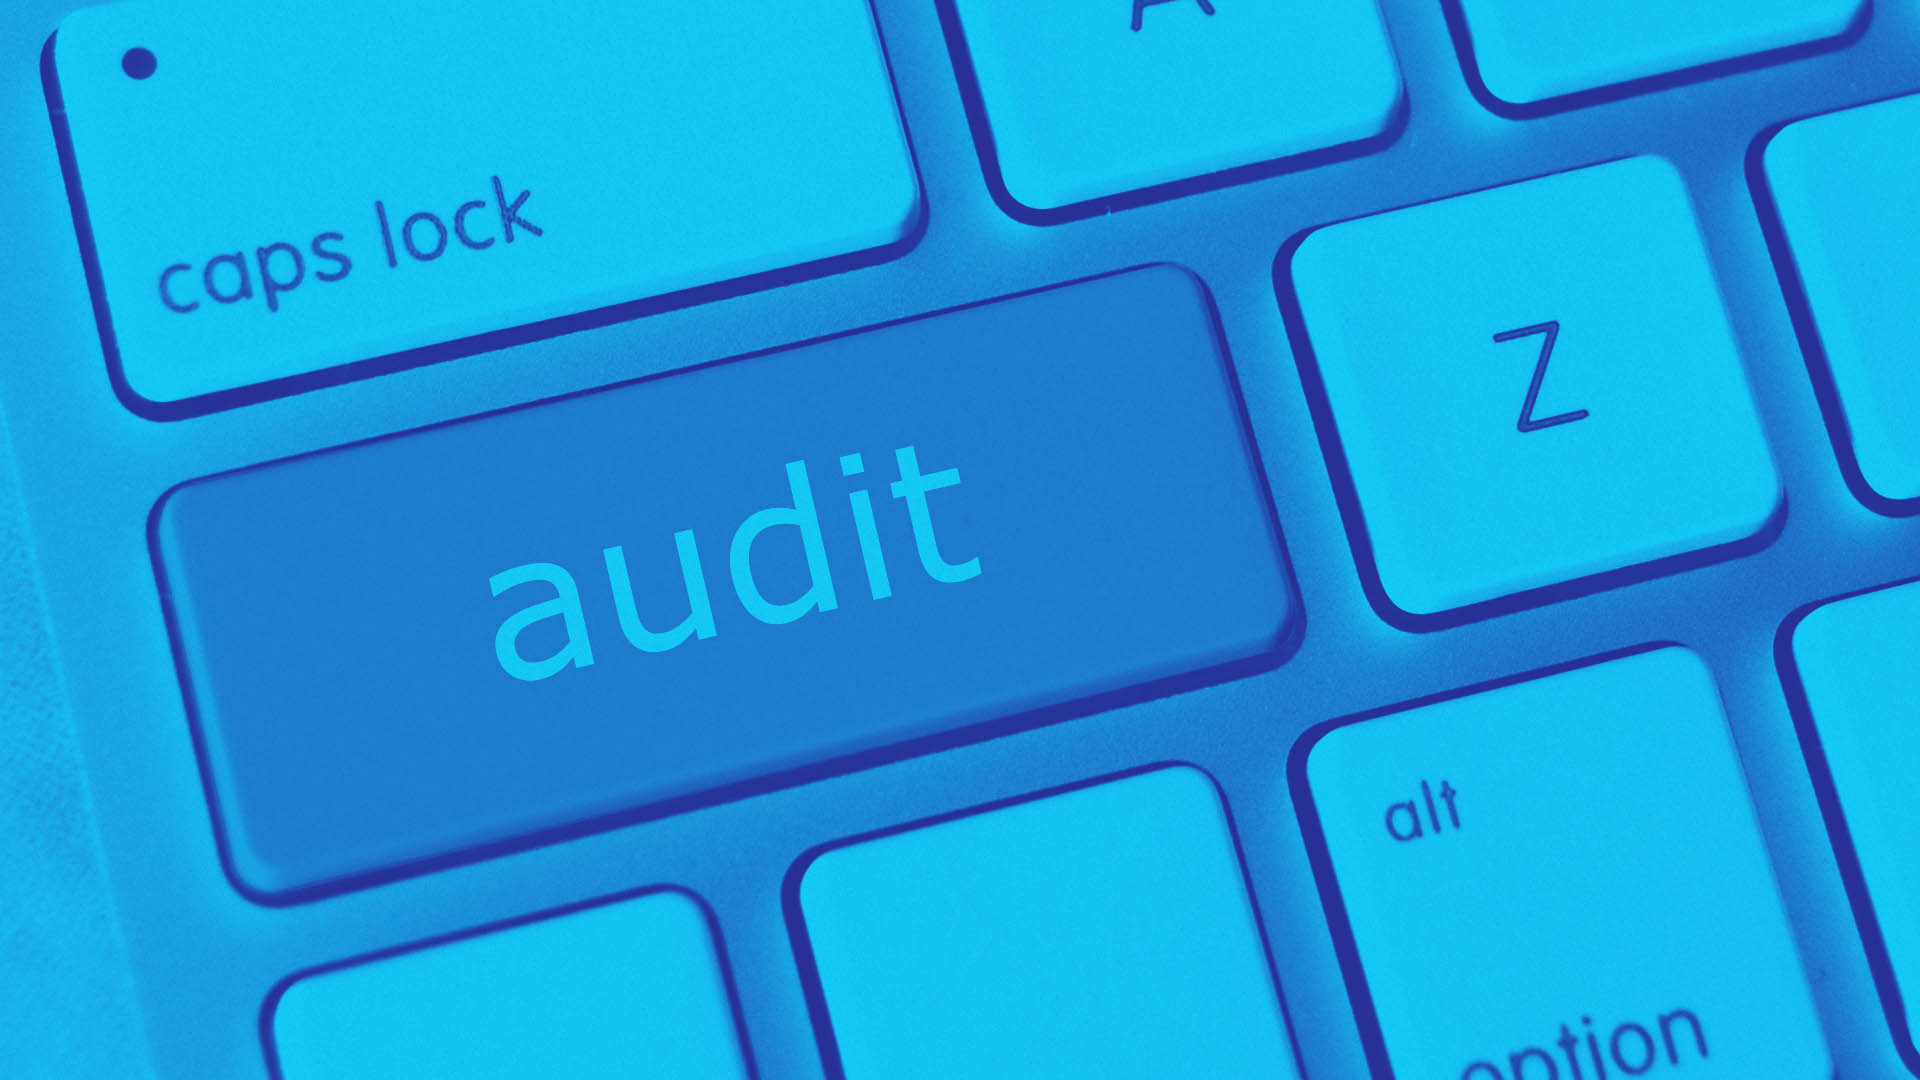 How much do your compliance audits really cost?